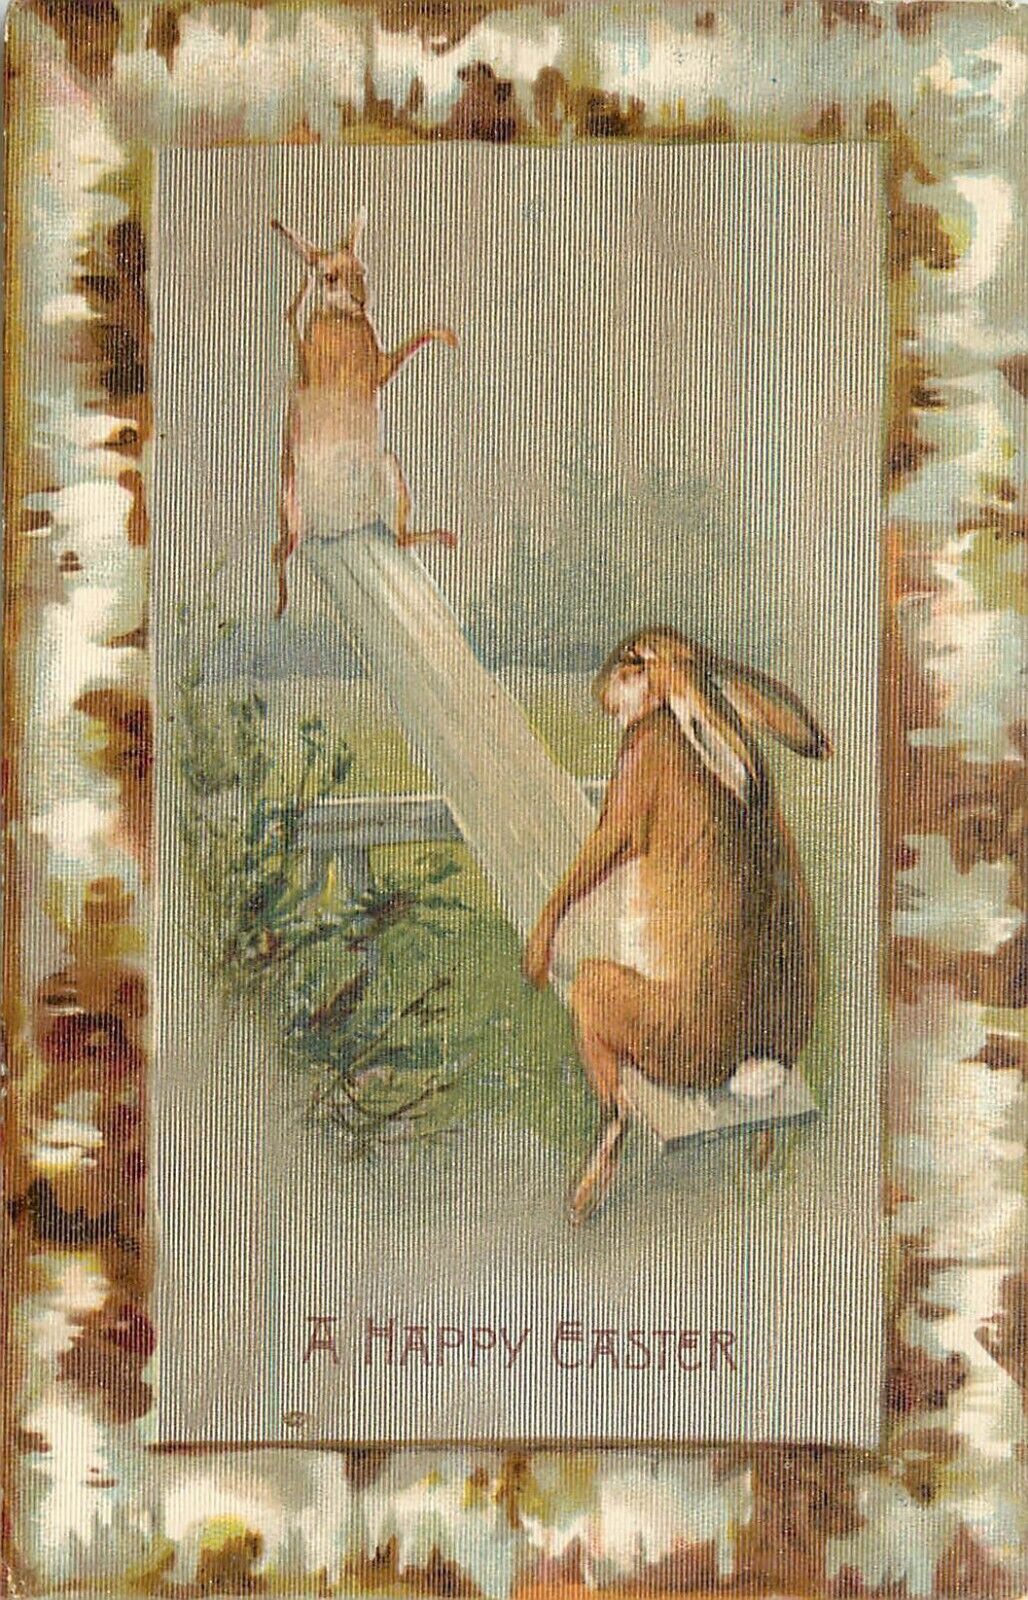 Winsch Textured Postcard Rabbits On a Seesaw Teeter Totter Easter Greetings